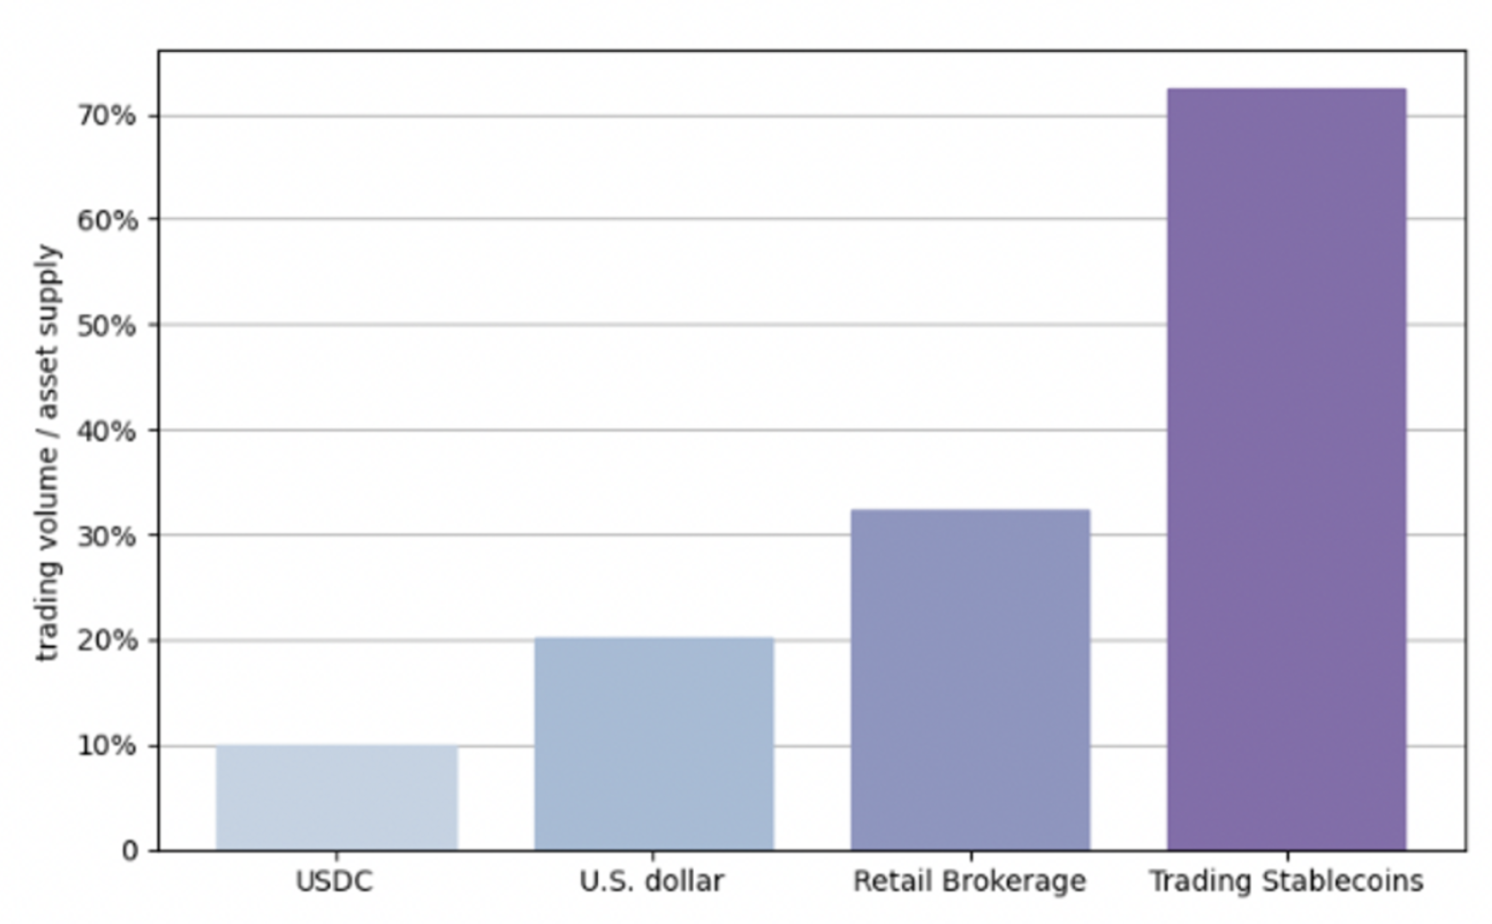 Figure 1 The tokenised US dollar is used less frequently in trading than the US dollar